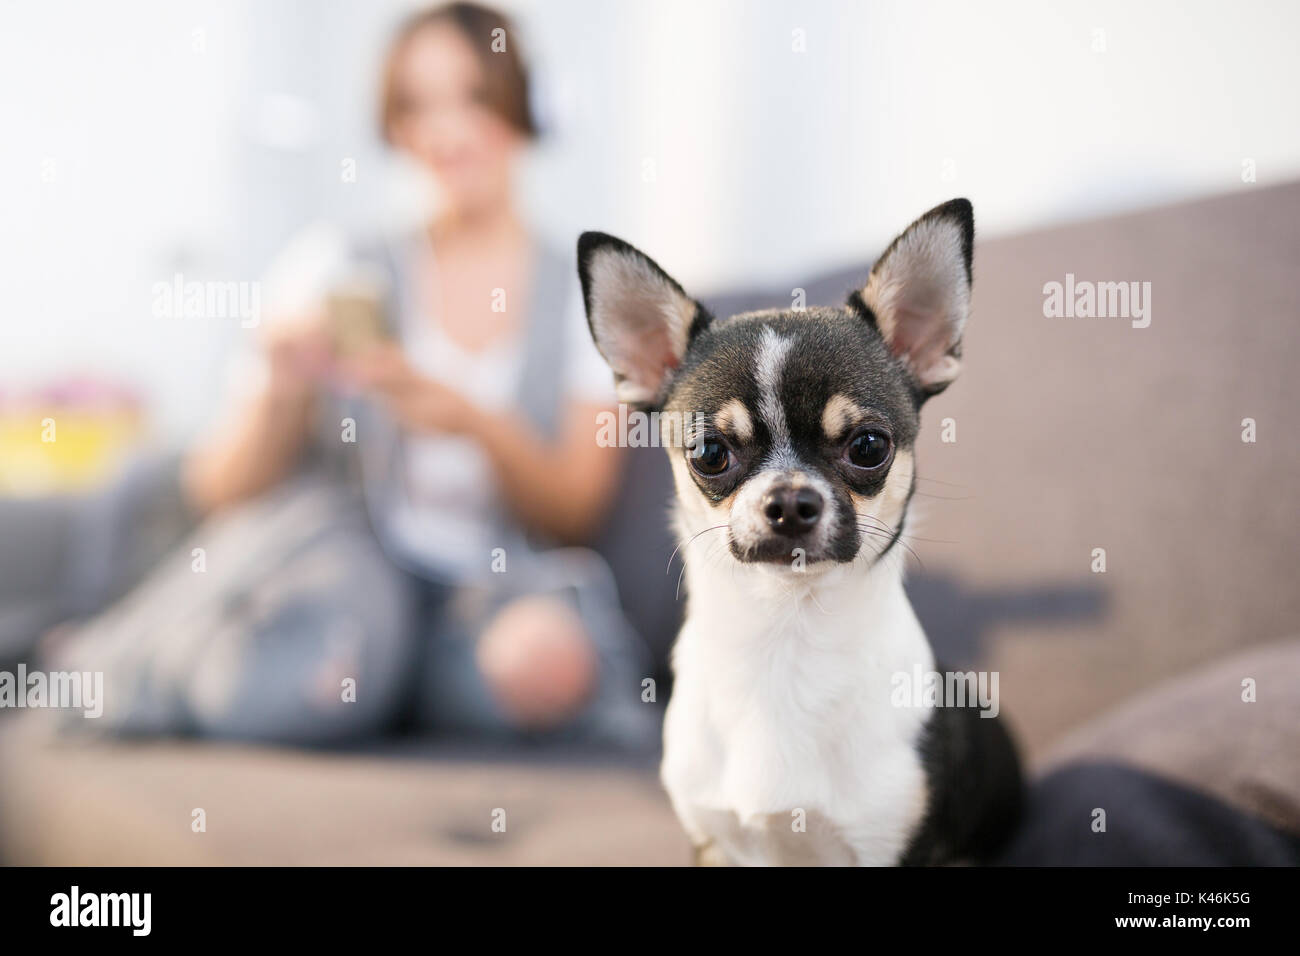 Close up portrait of small cute dog sitting at home. Stock Photo